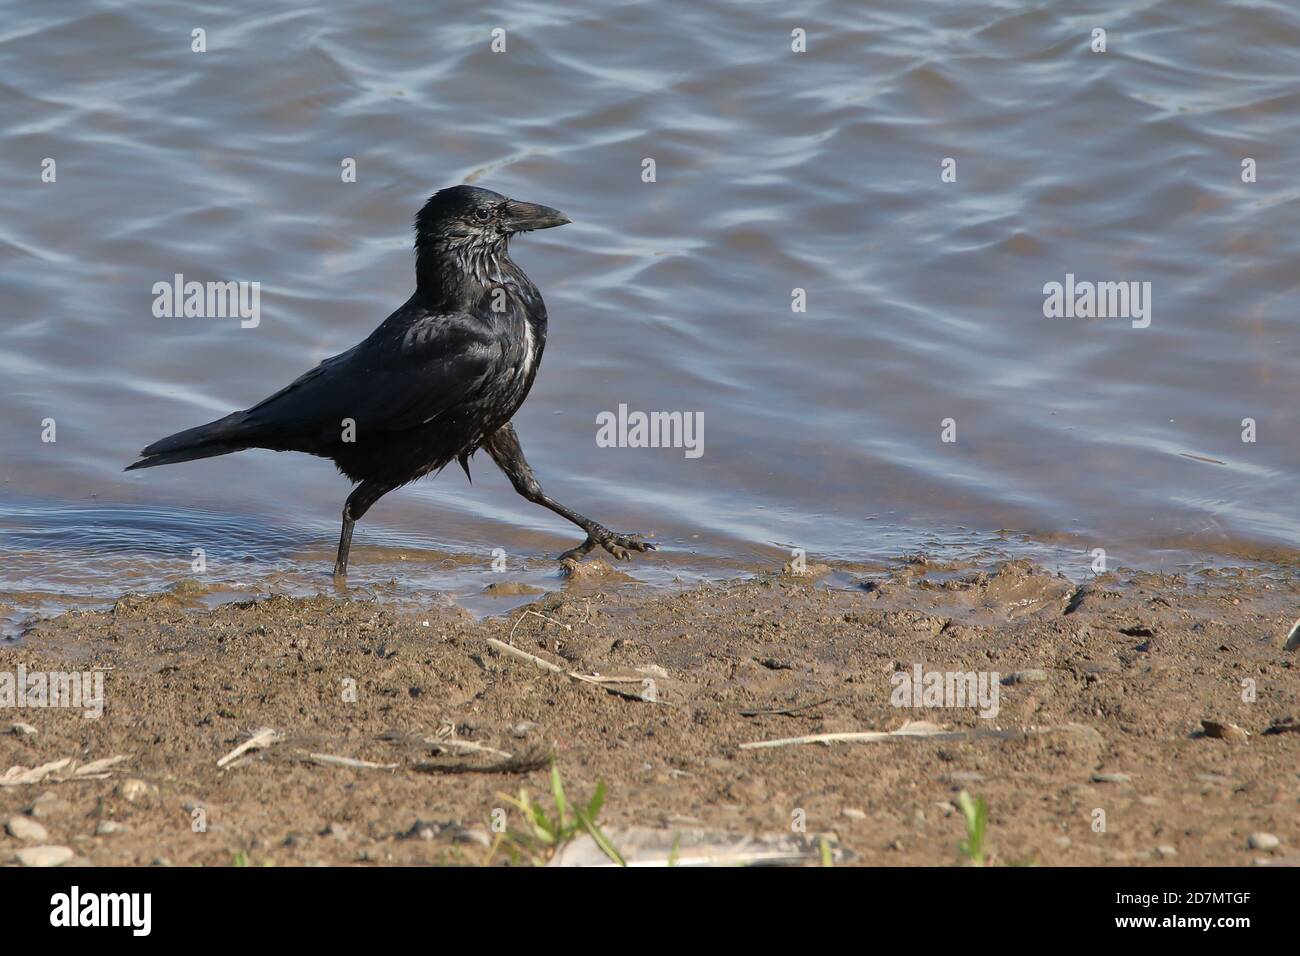 Carrion Crow walking along the shore Stock Photo